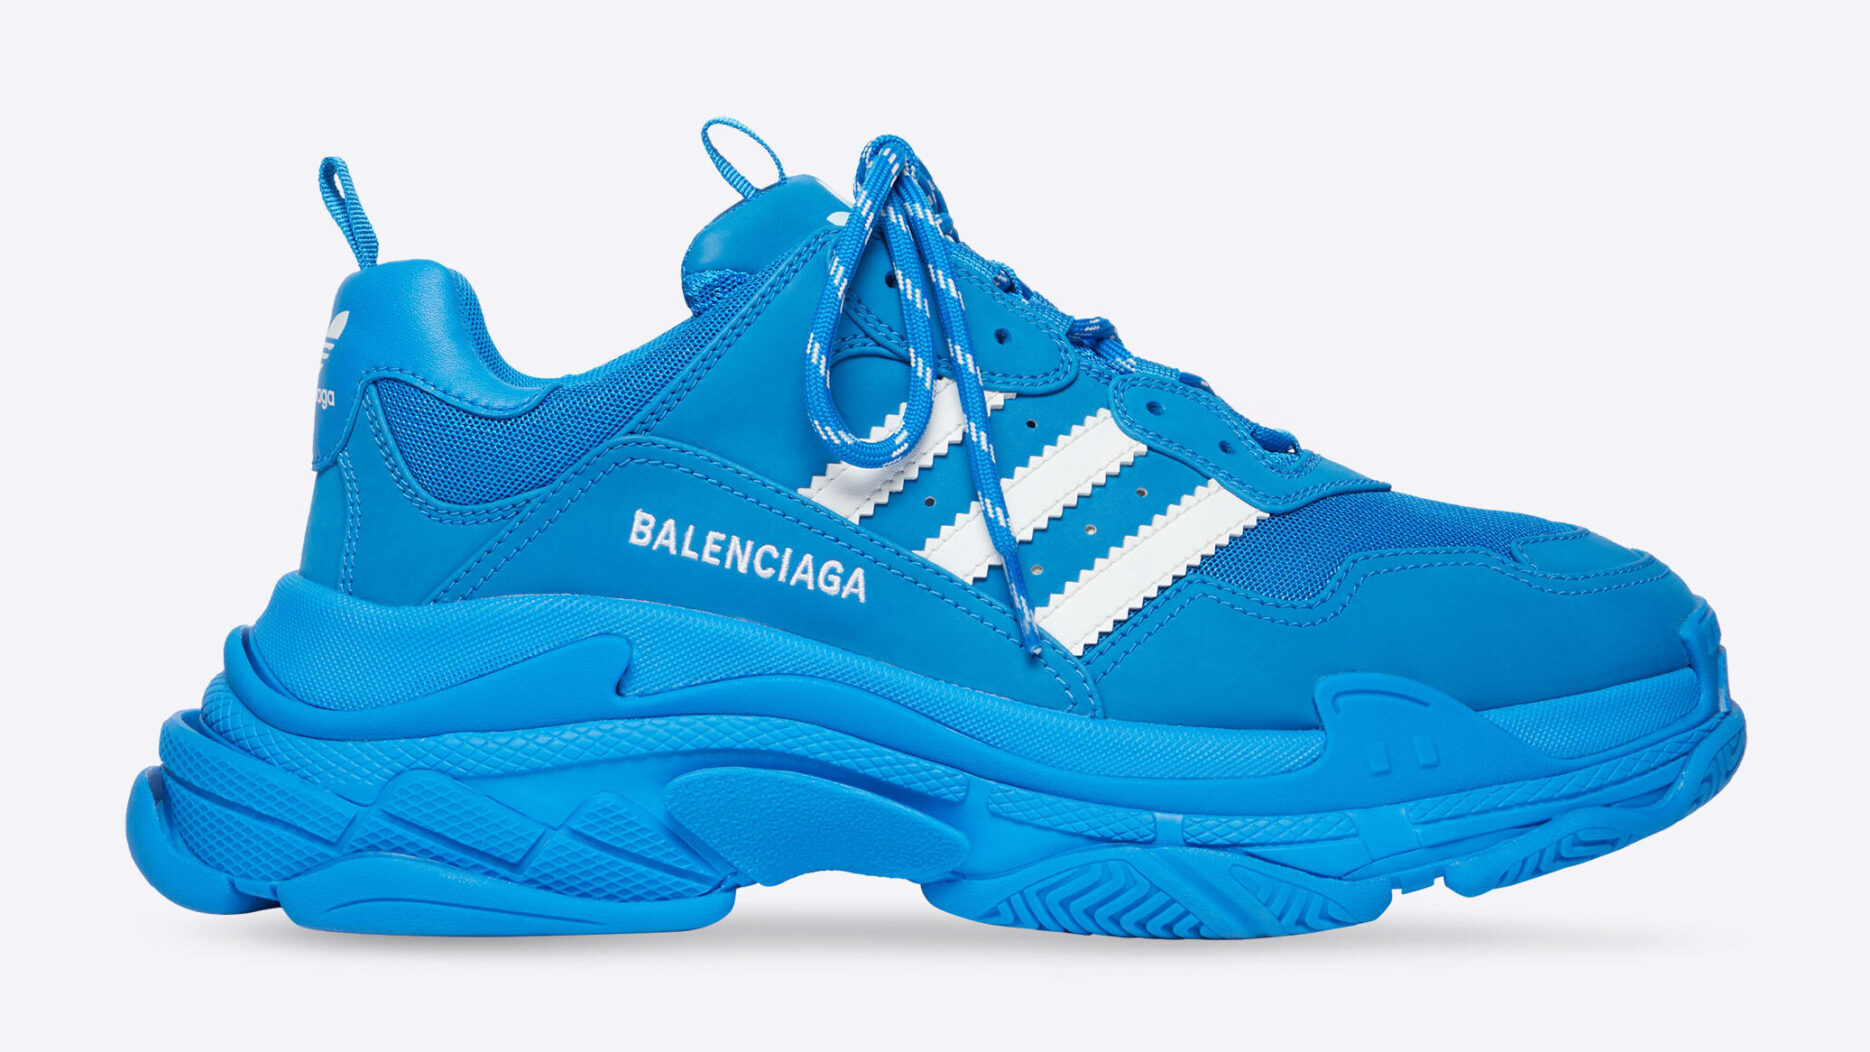 Balenciaga unveils first digital collectible in collaboration with Adidas